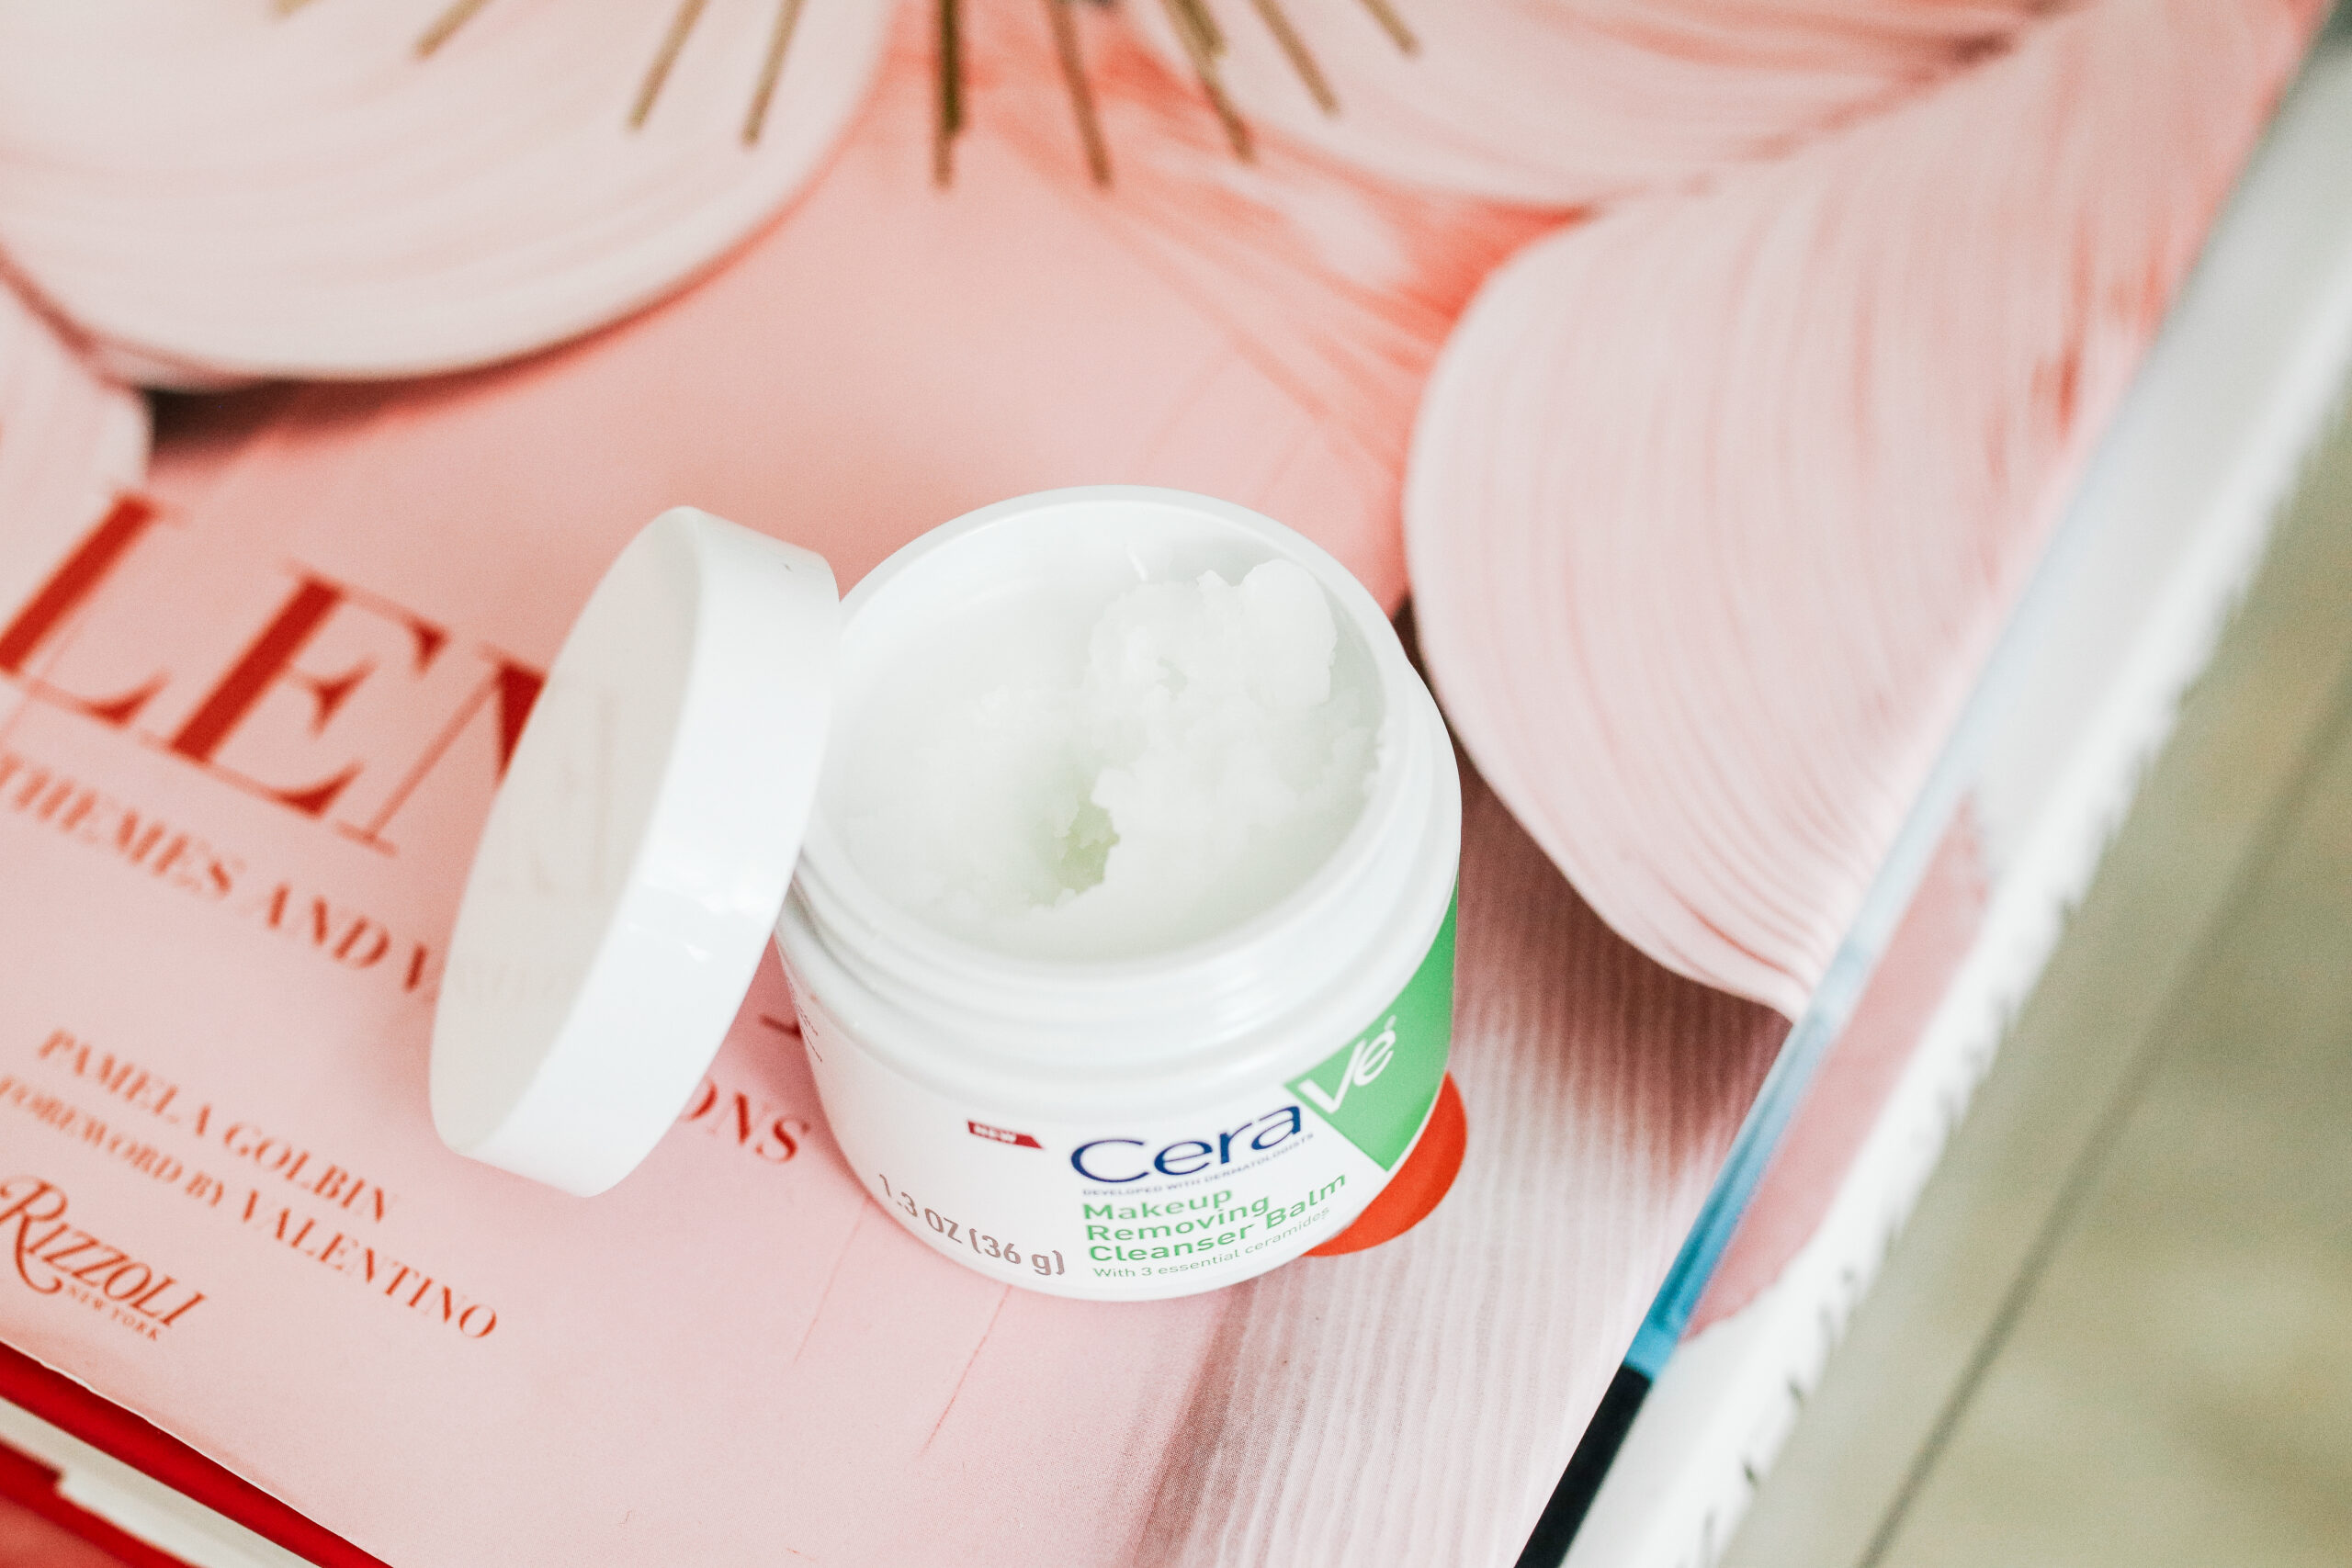 Cerave Makeup Removing Cleansing Balm Review